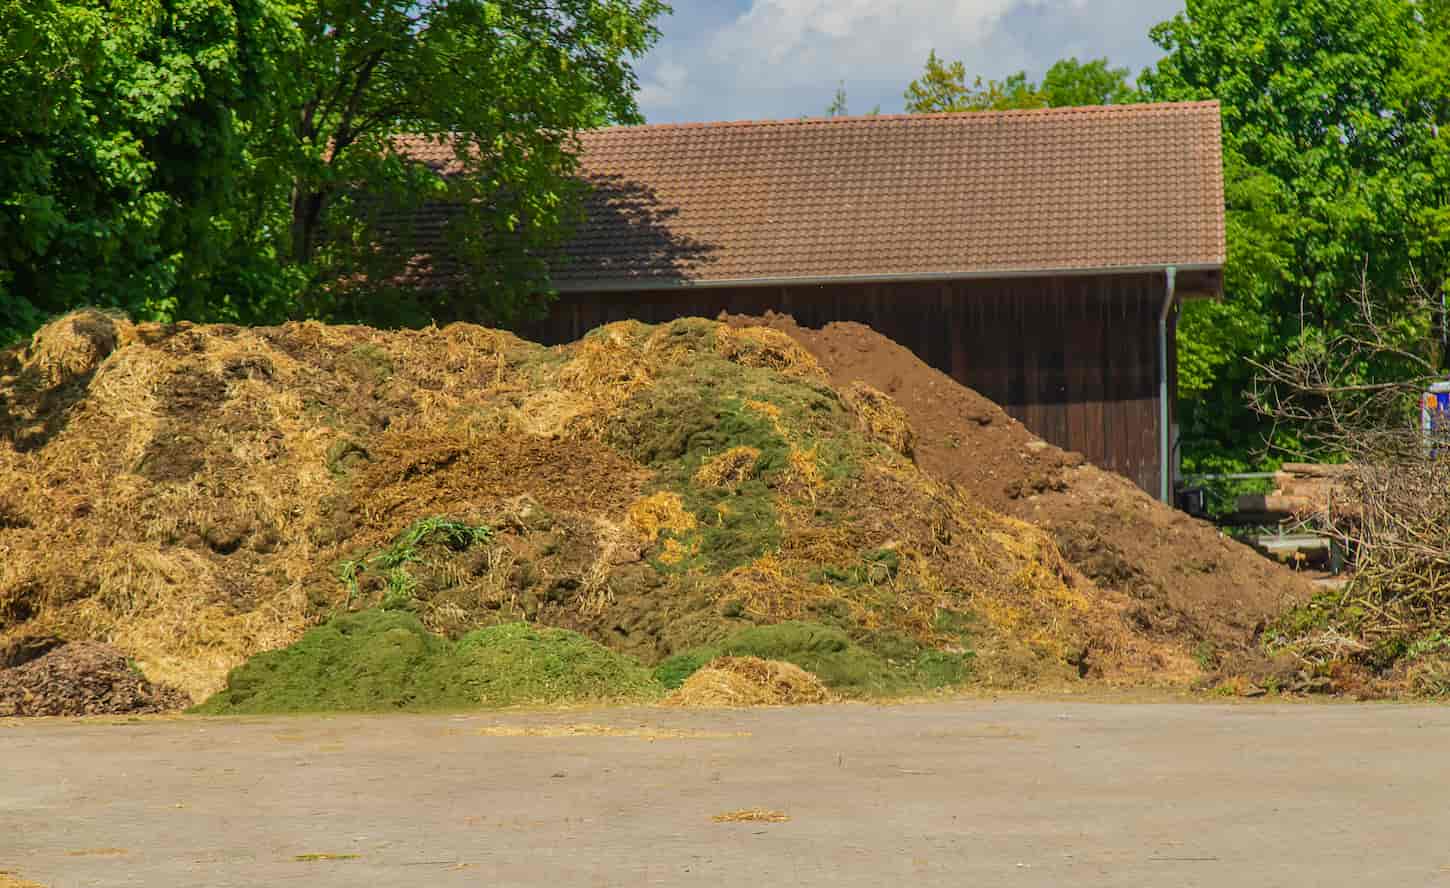 An image of a Pile of manure on the farm.